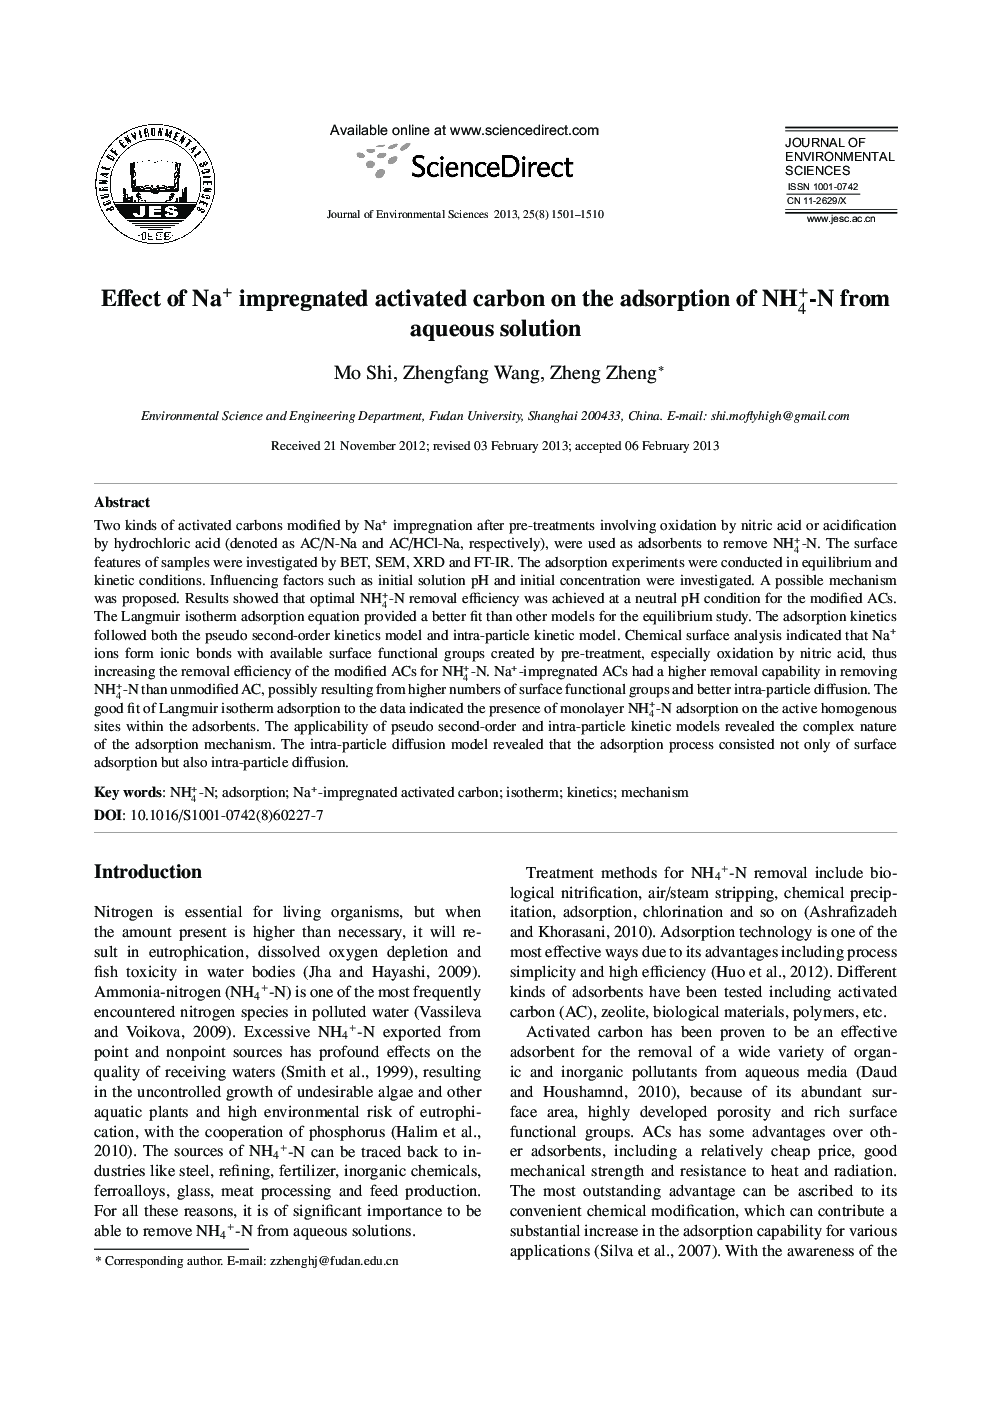 Effect of Na+ impregnated activated carbon on the adsorption of NH+4-N from aqueous solution